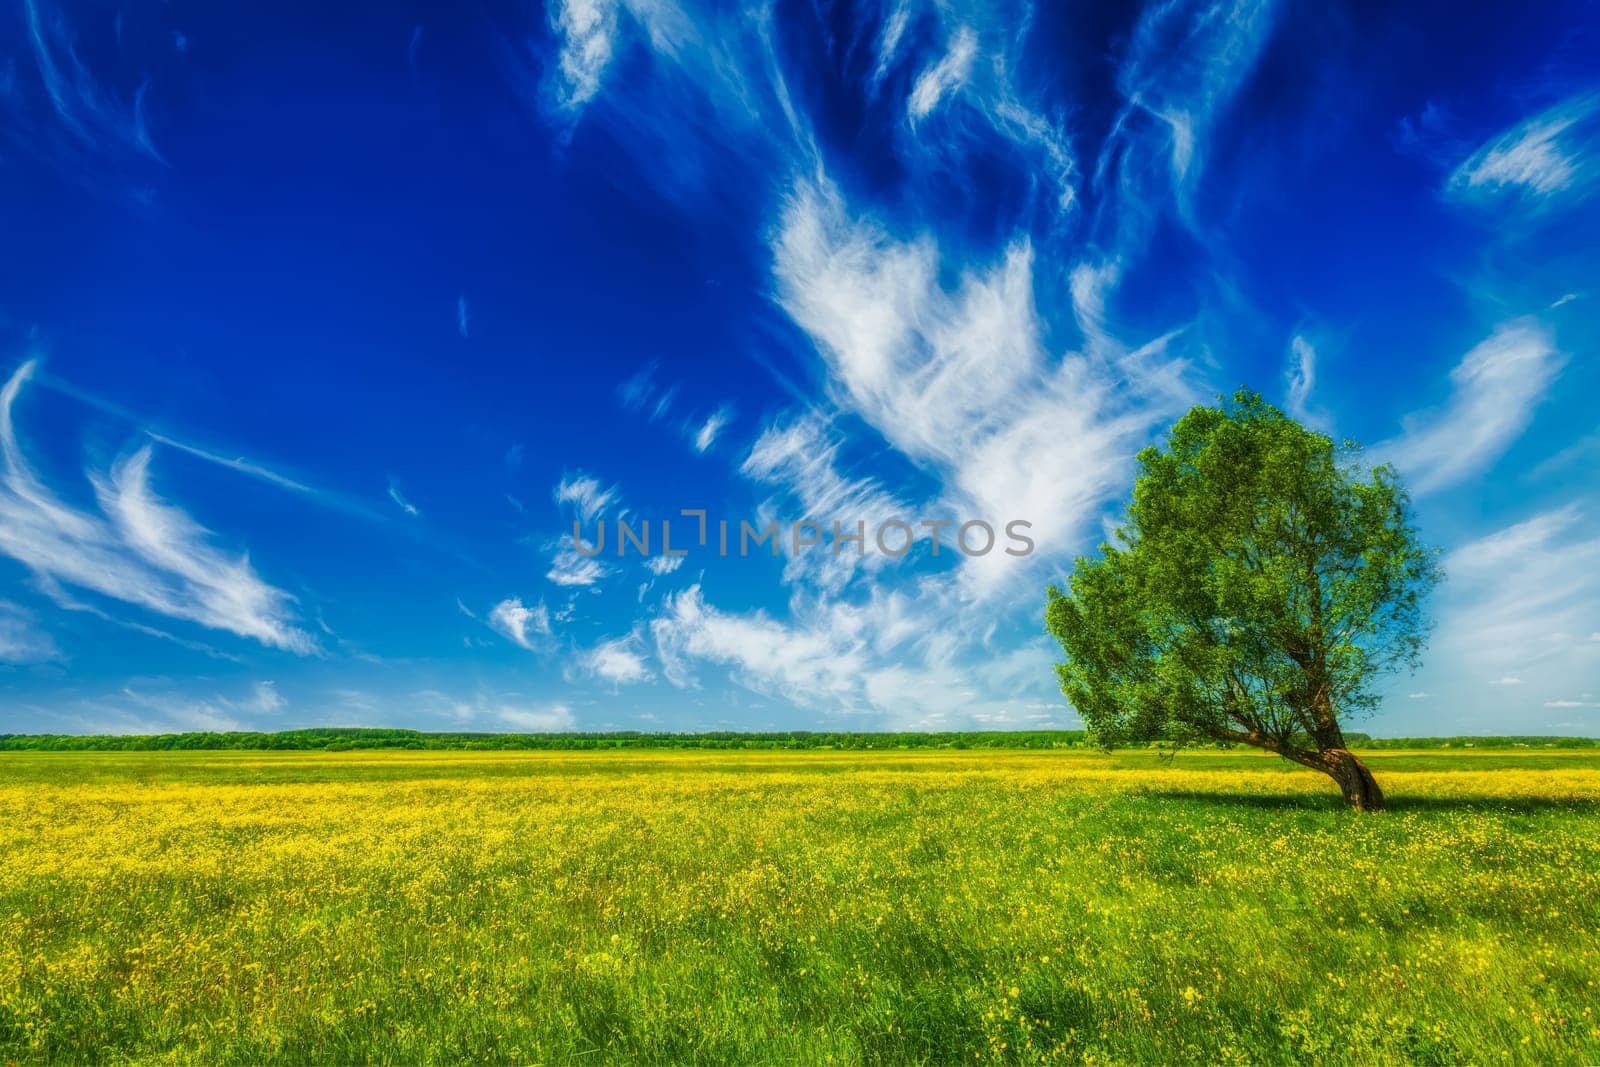 Spring summer background - blooming flowers green grass field meadow scenery landscape under blue sky with single lonely tree